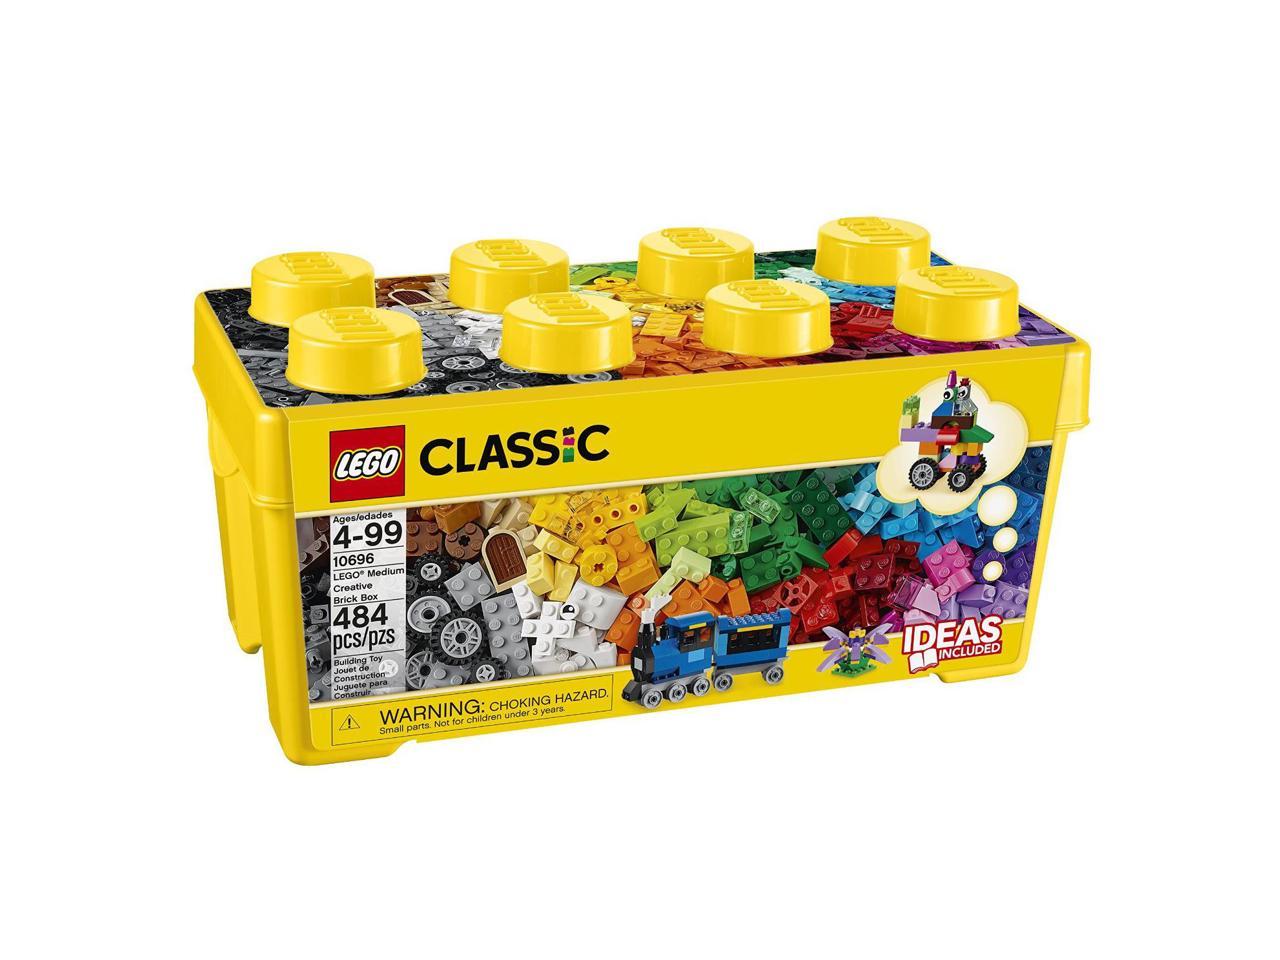 LEGO has been making construction toys since 1949, and the interlocking bricks are still one of the best ways to encourage creativity in youngsters.